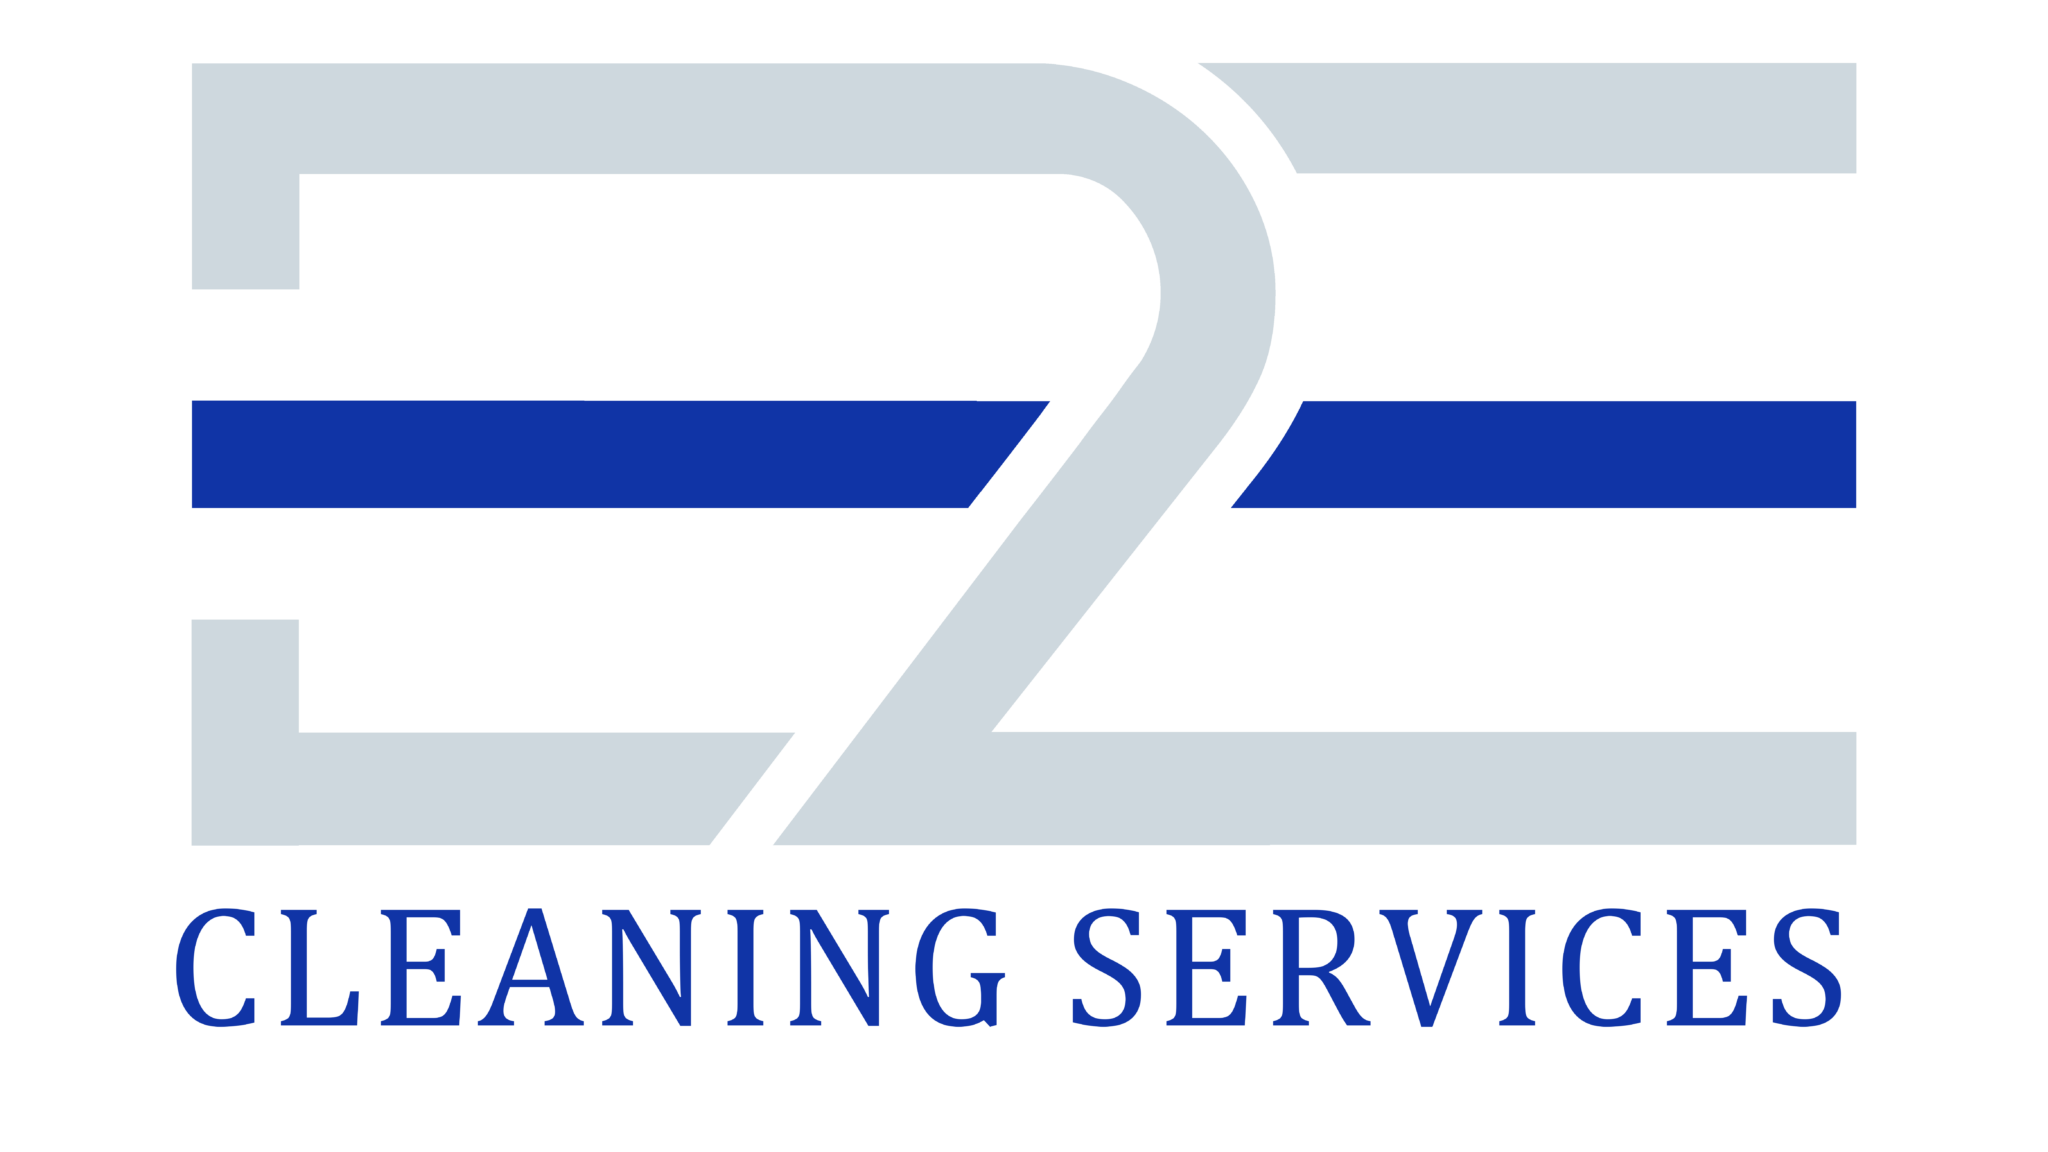 E2E Cleaning Services review